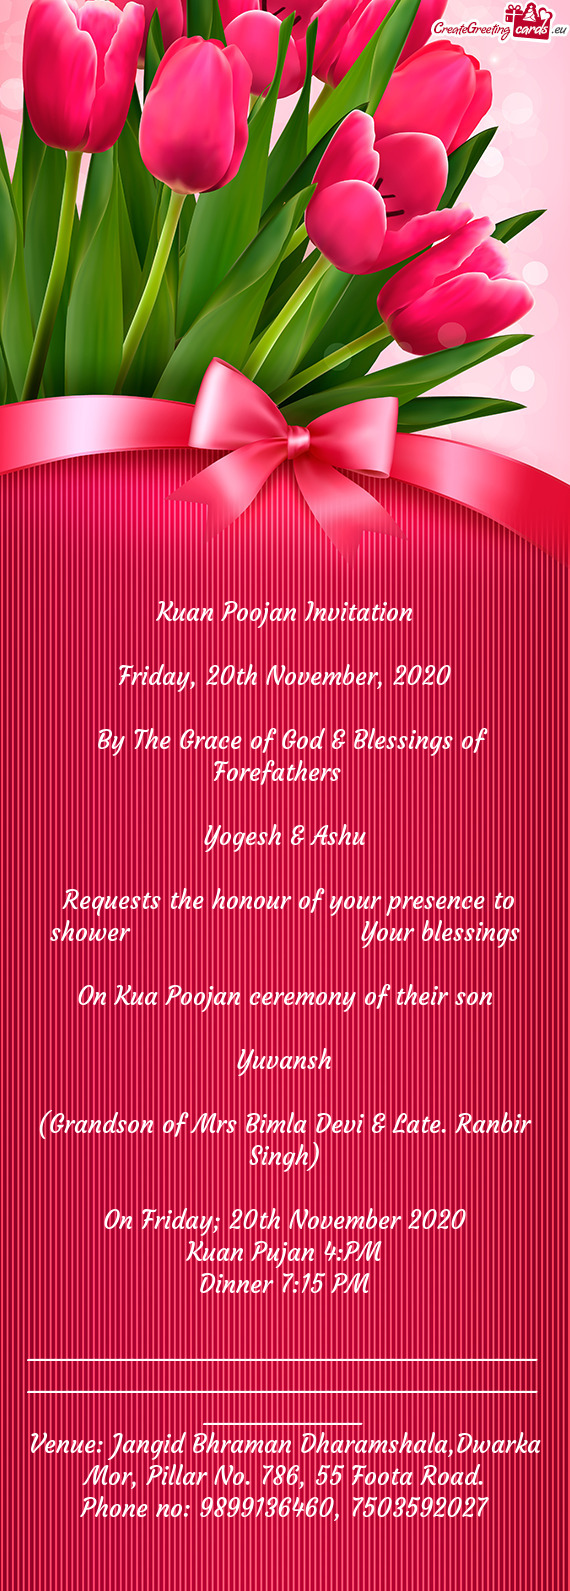 Requests the honour of your presence to shower        Your blessings